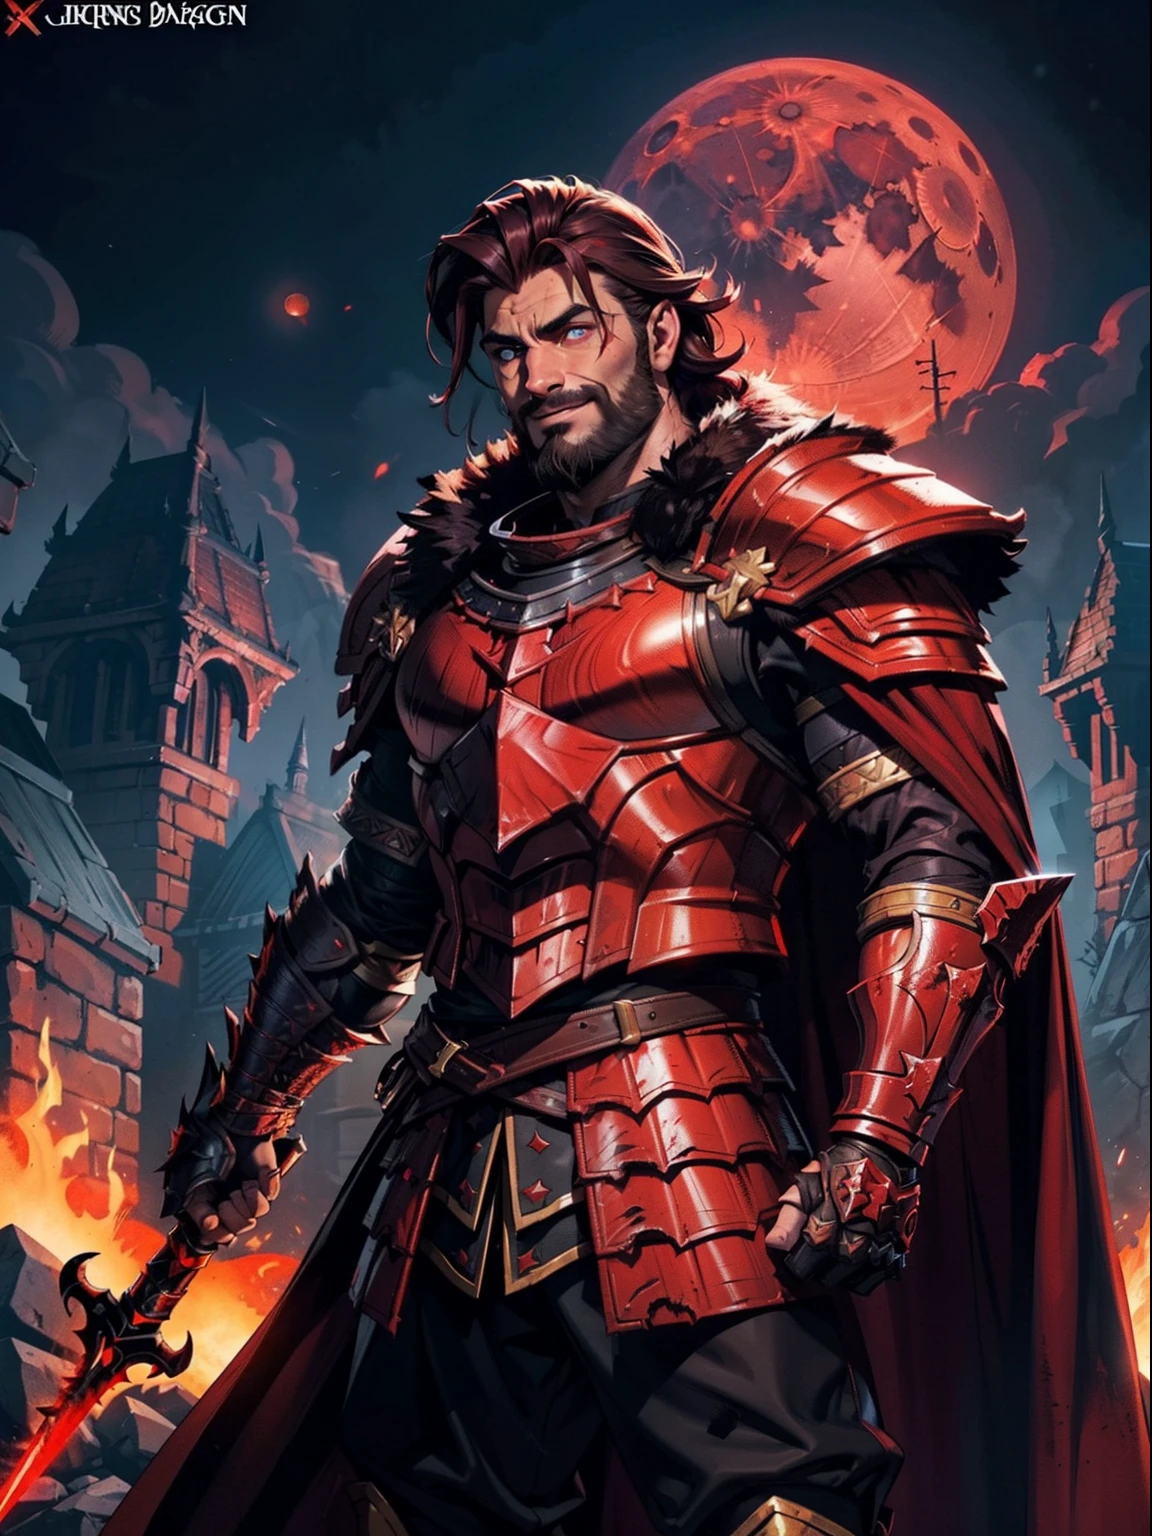 Dark night blood moon background, Darkest Dungeon style, game portrait. Kevin Smith as Ares from Xena, athlete, short mane hair, mullet, defined face, detailed eyes, short beard, glowing red eyes, dark hair, wily smile, badass, dangerous. Wearing full armor with red dragon scales, cape of furs.  Breath fire.